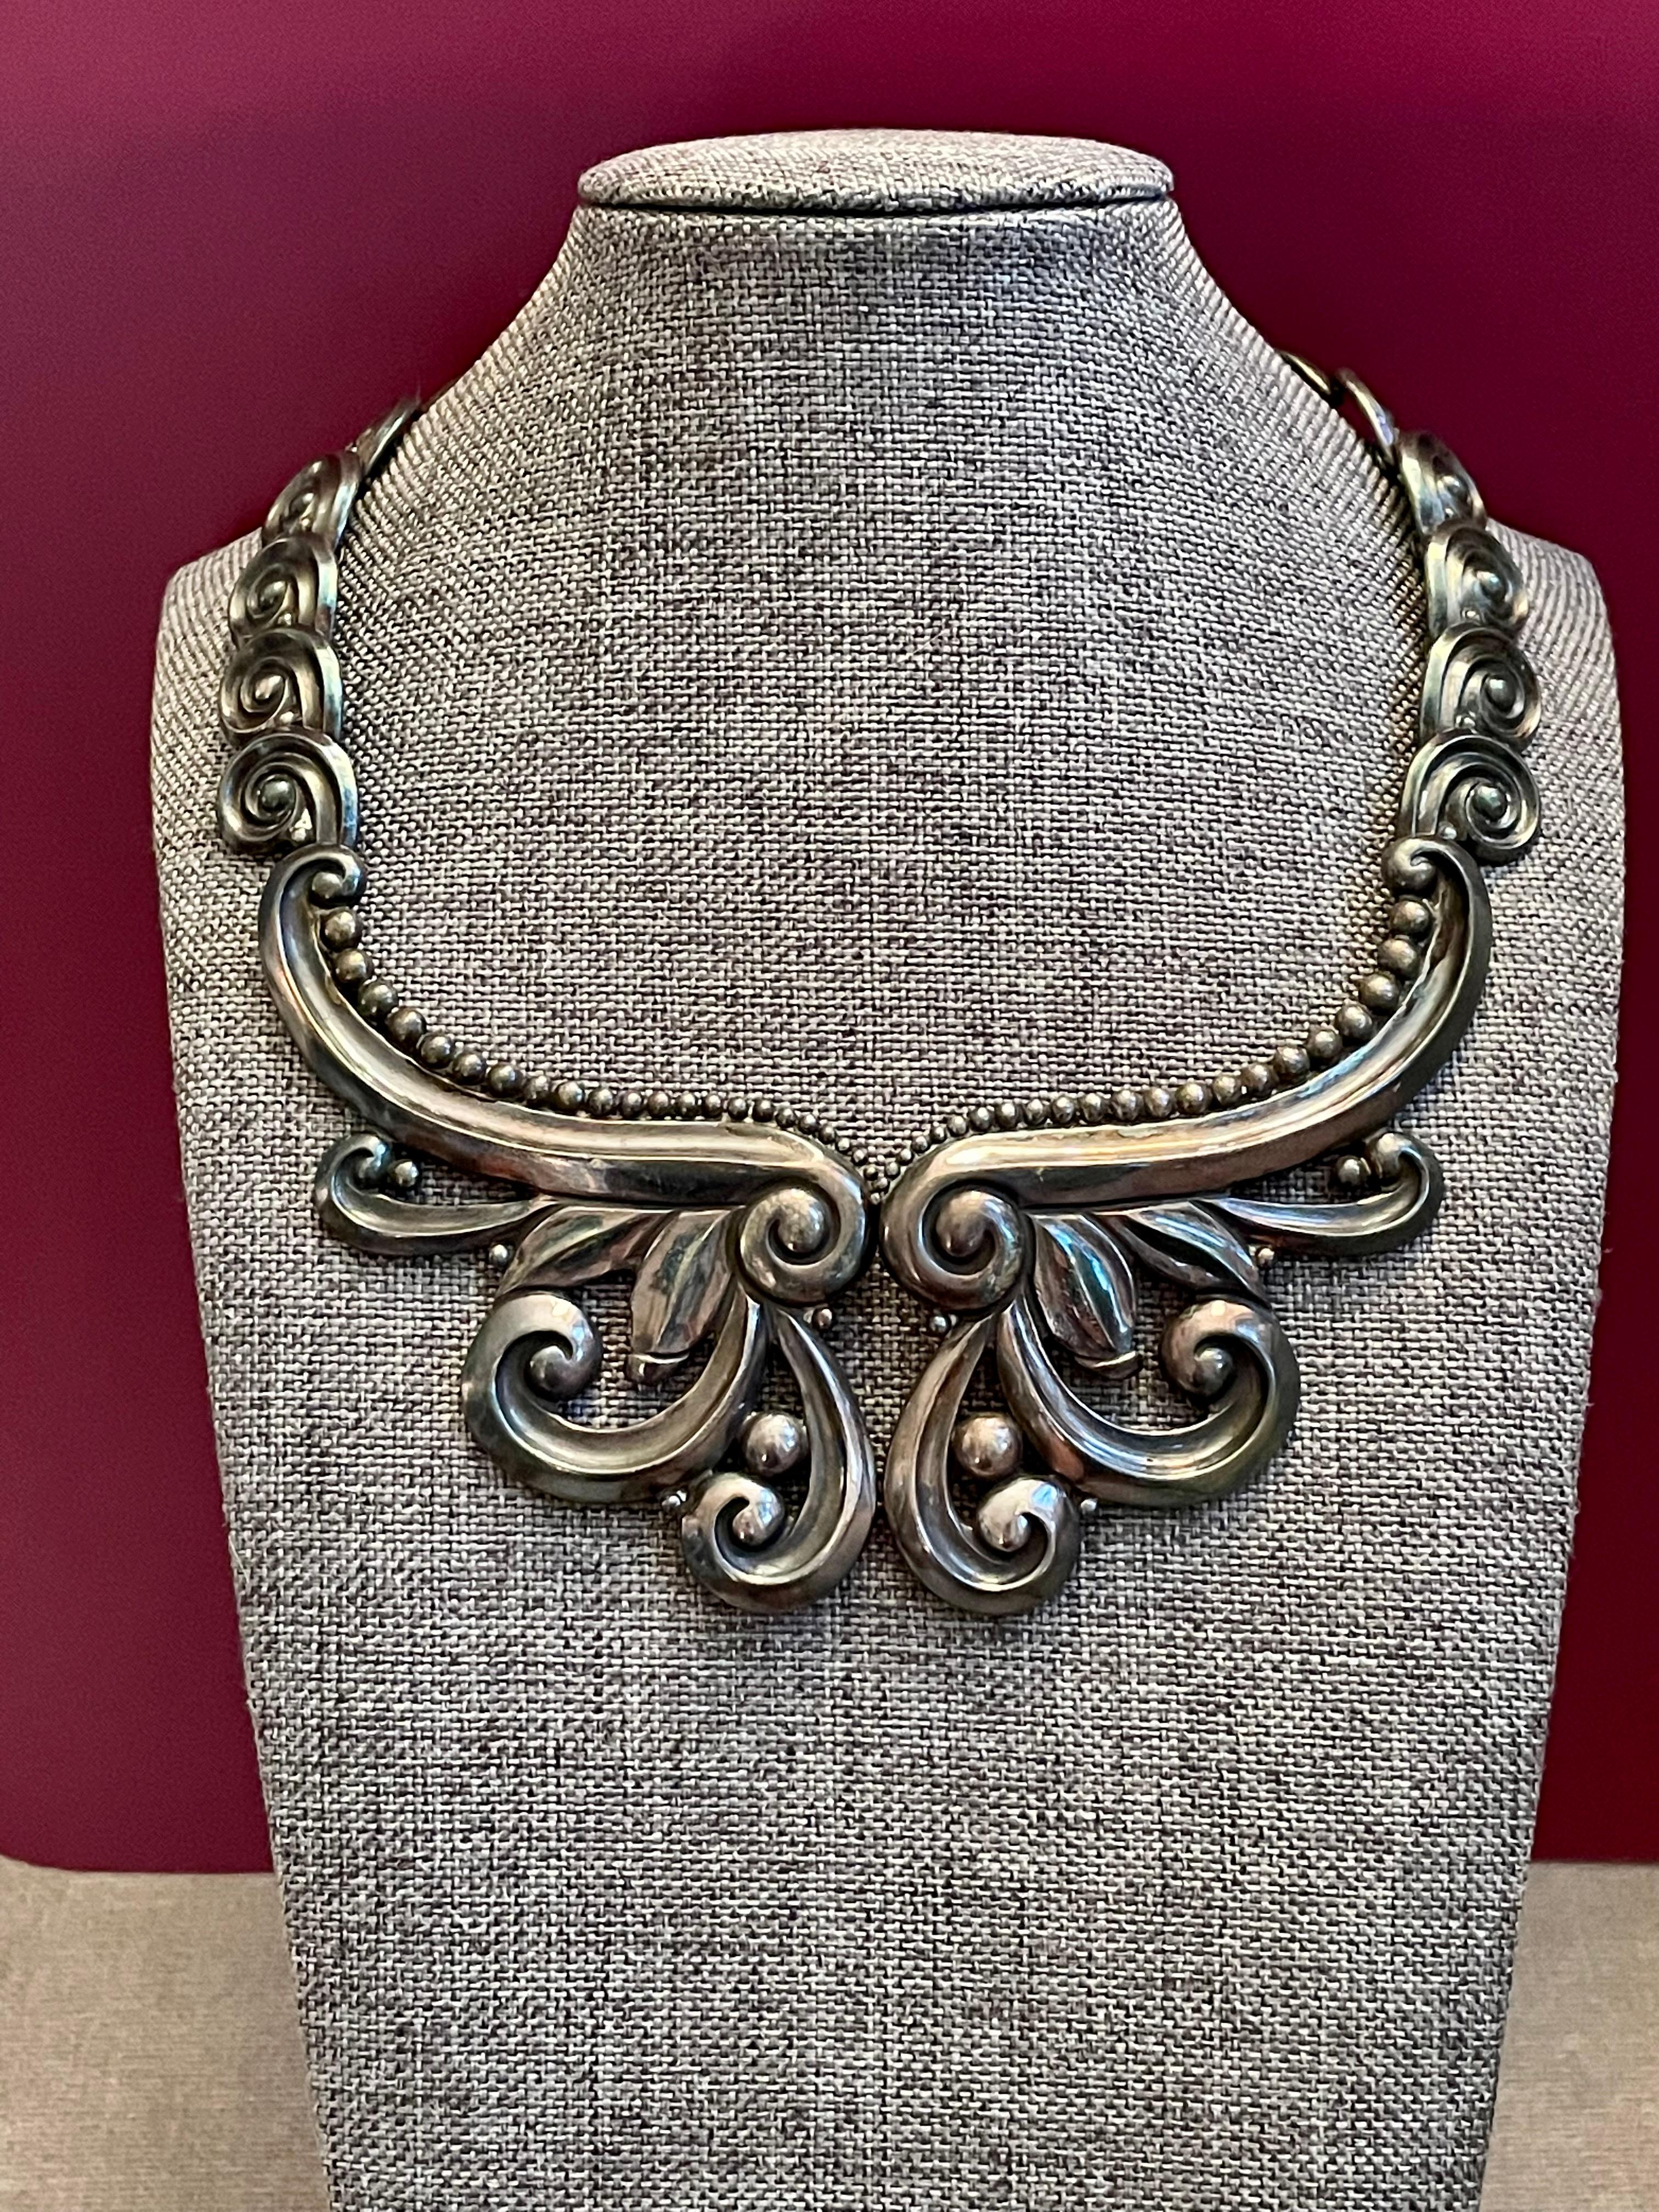 This Monumental Los Castillo Taxco Mexico necklace is a Repousse in Sterling Silver.  The book-piece design necklace has the original box clasp which is in working order.

Stamped: LOS CASTILLOS TAXCO STERLING MADE IN MEXICO 925 Numbered